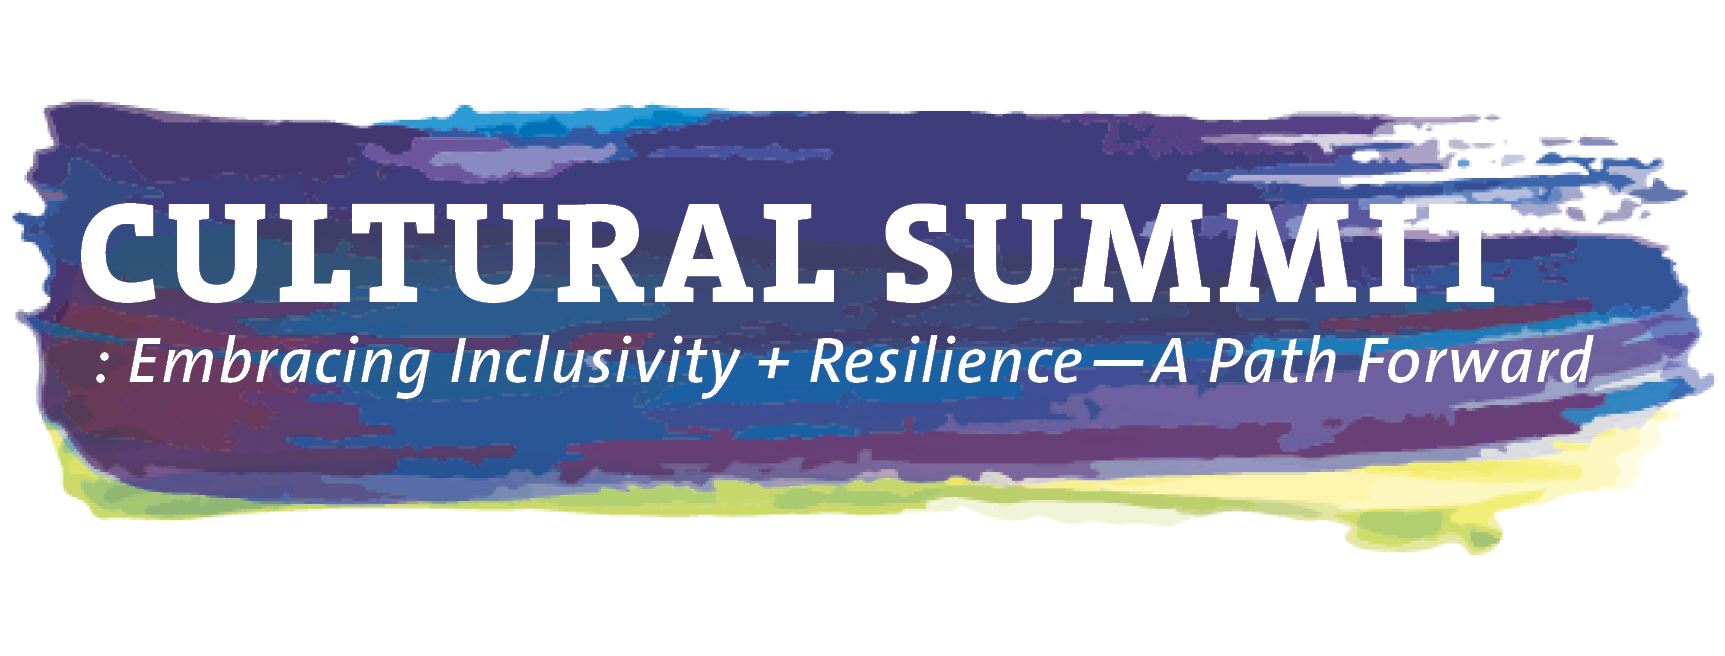 Cultural Summit Embracing Inclusivity + Resilience - A Path Forward